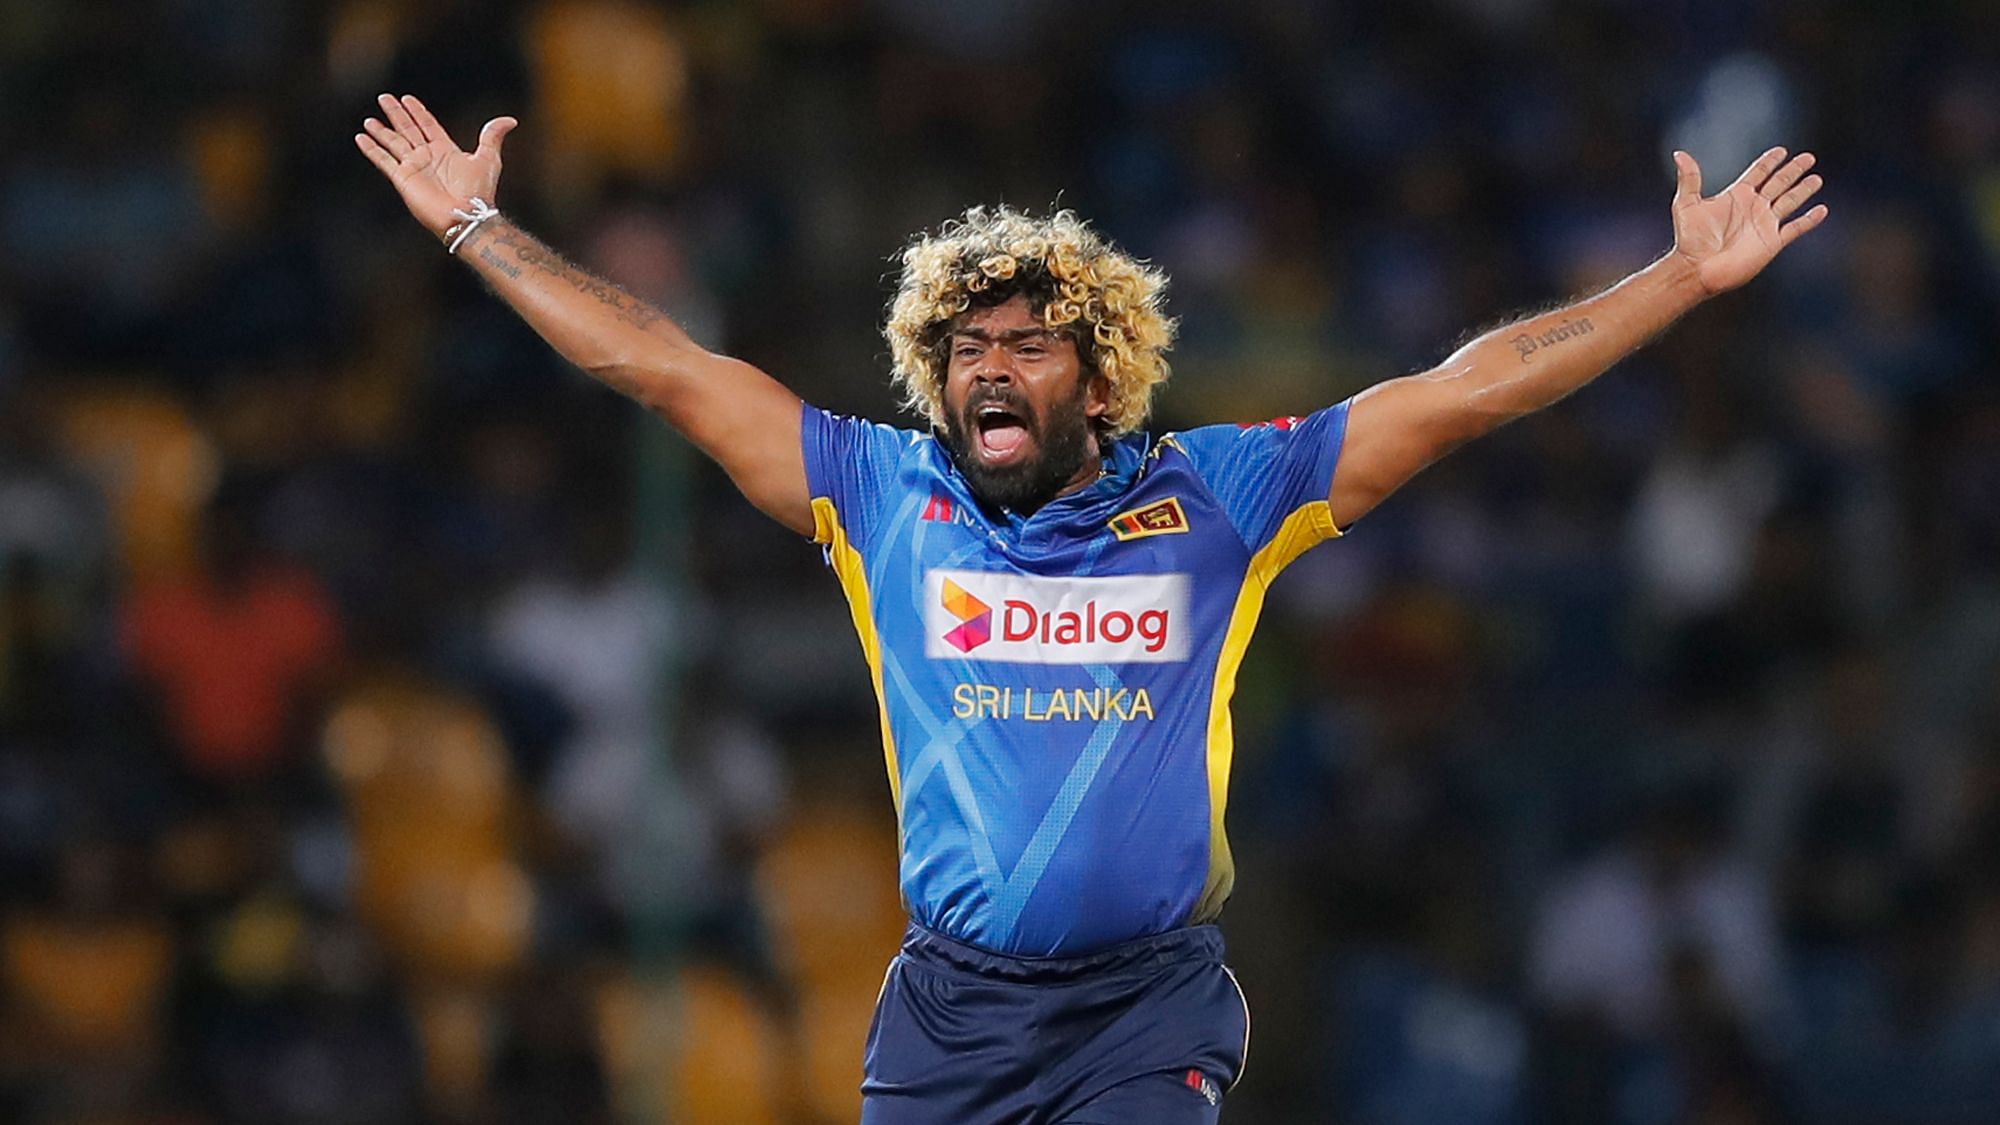 Lasith Malinga took four wickets in four balls during their third match against New Zealand, also becoming the first bowler to take 100 wickets in T20I cricket.